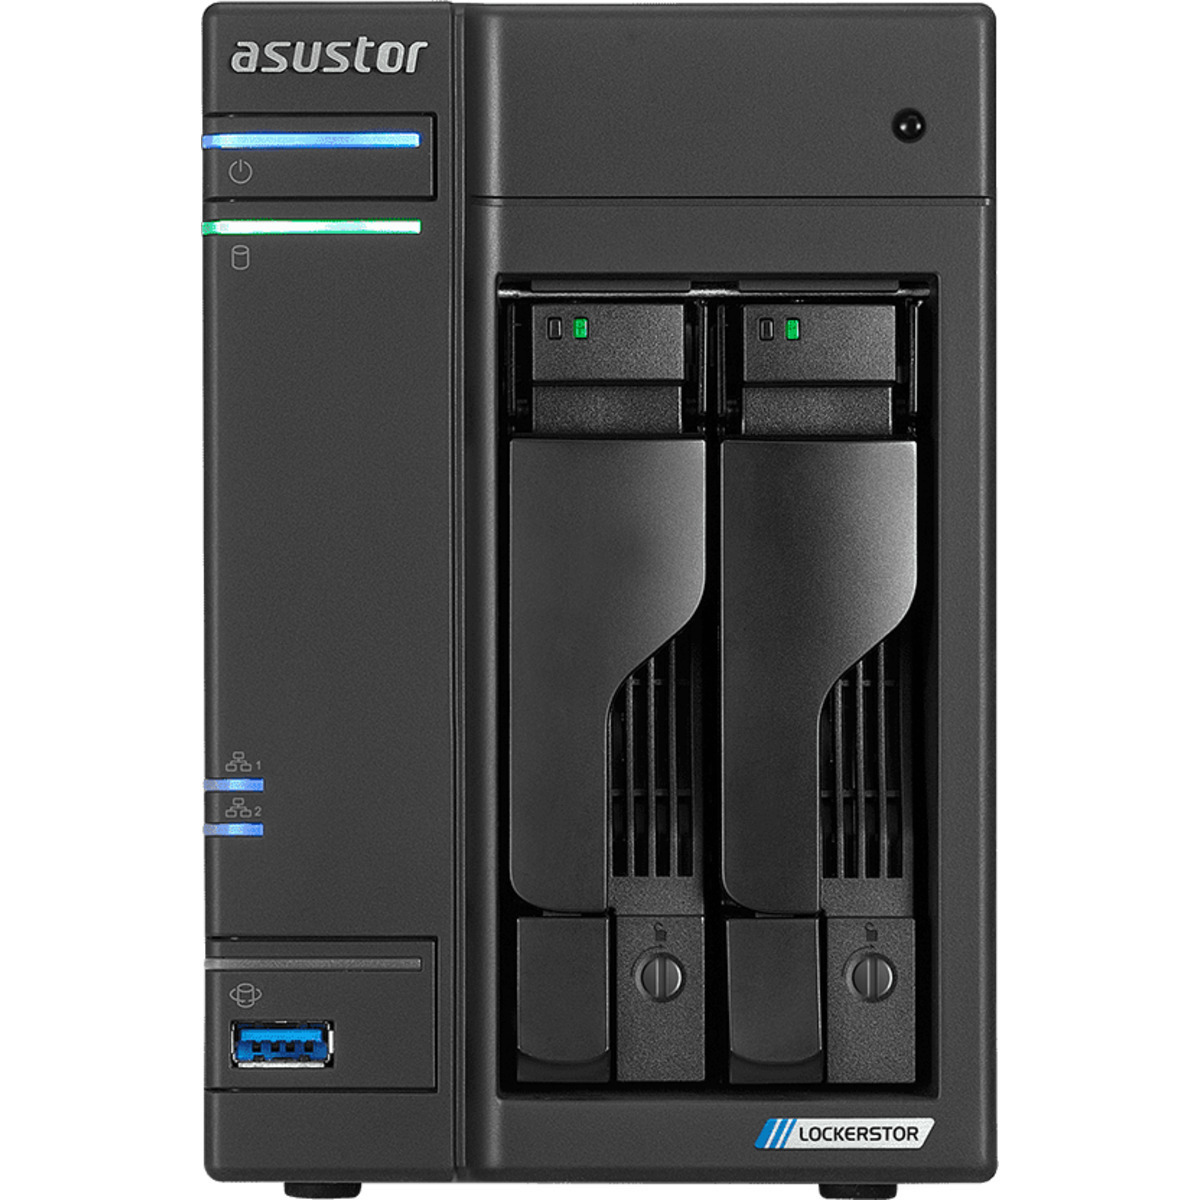 ASUSTOR AS6602T Lockerstor 2 2tb 2-Bay Desktop Multimedia / Power User / Business NAS - Network Attached Storage Device 2x1tb Western Digital Red SA500 WDS100T1R0A 2.5 560/530MB/s SATA 6Gb/s SSD NAS Class Drives Installed - Burn-In Tested - FREE RAM UPGRADE AS6602T Lockerstor 2